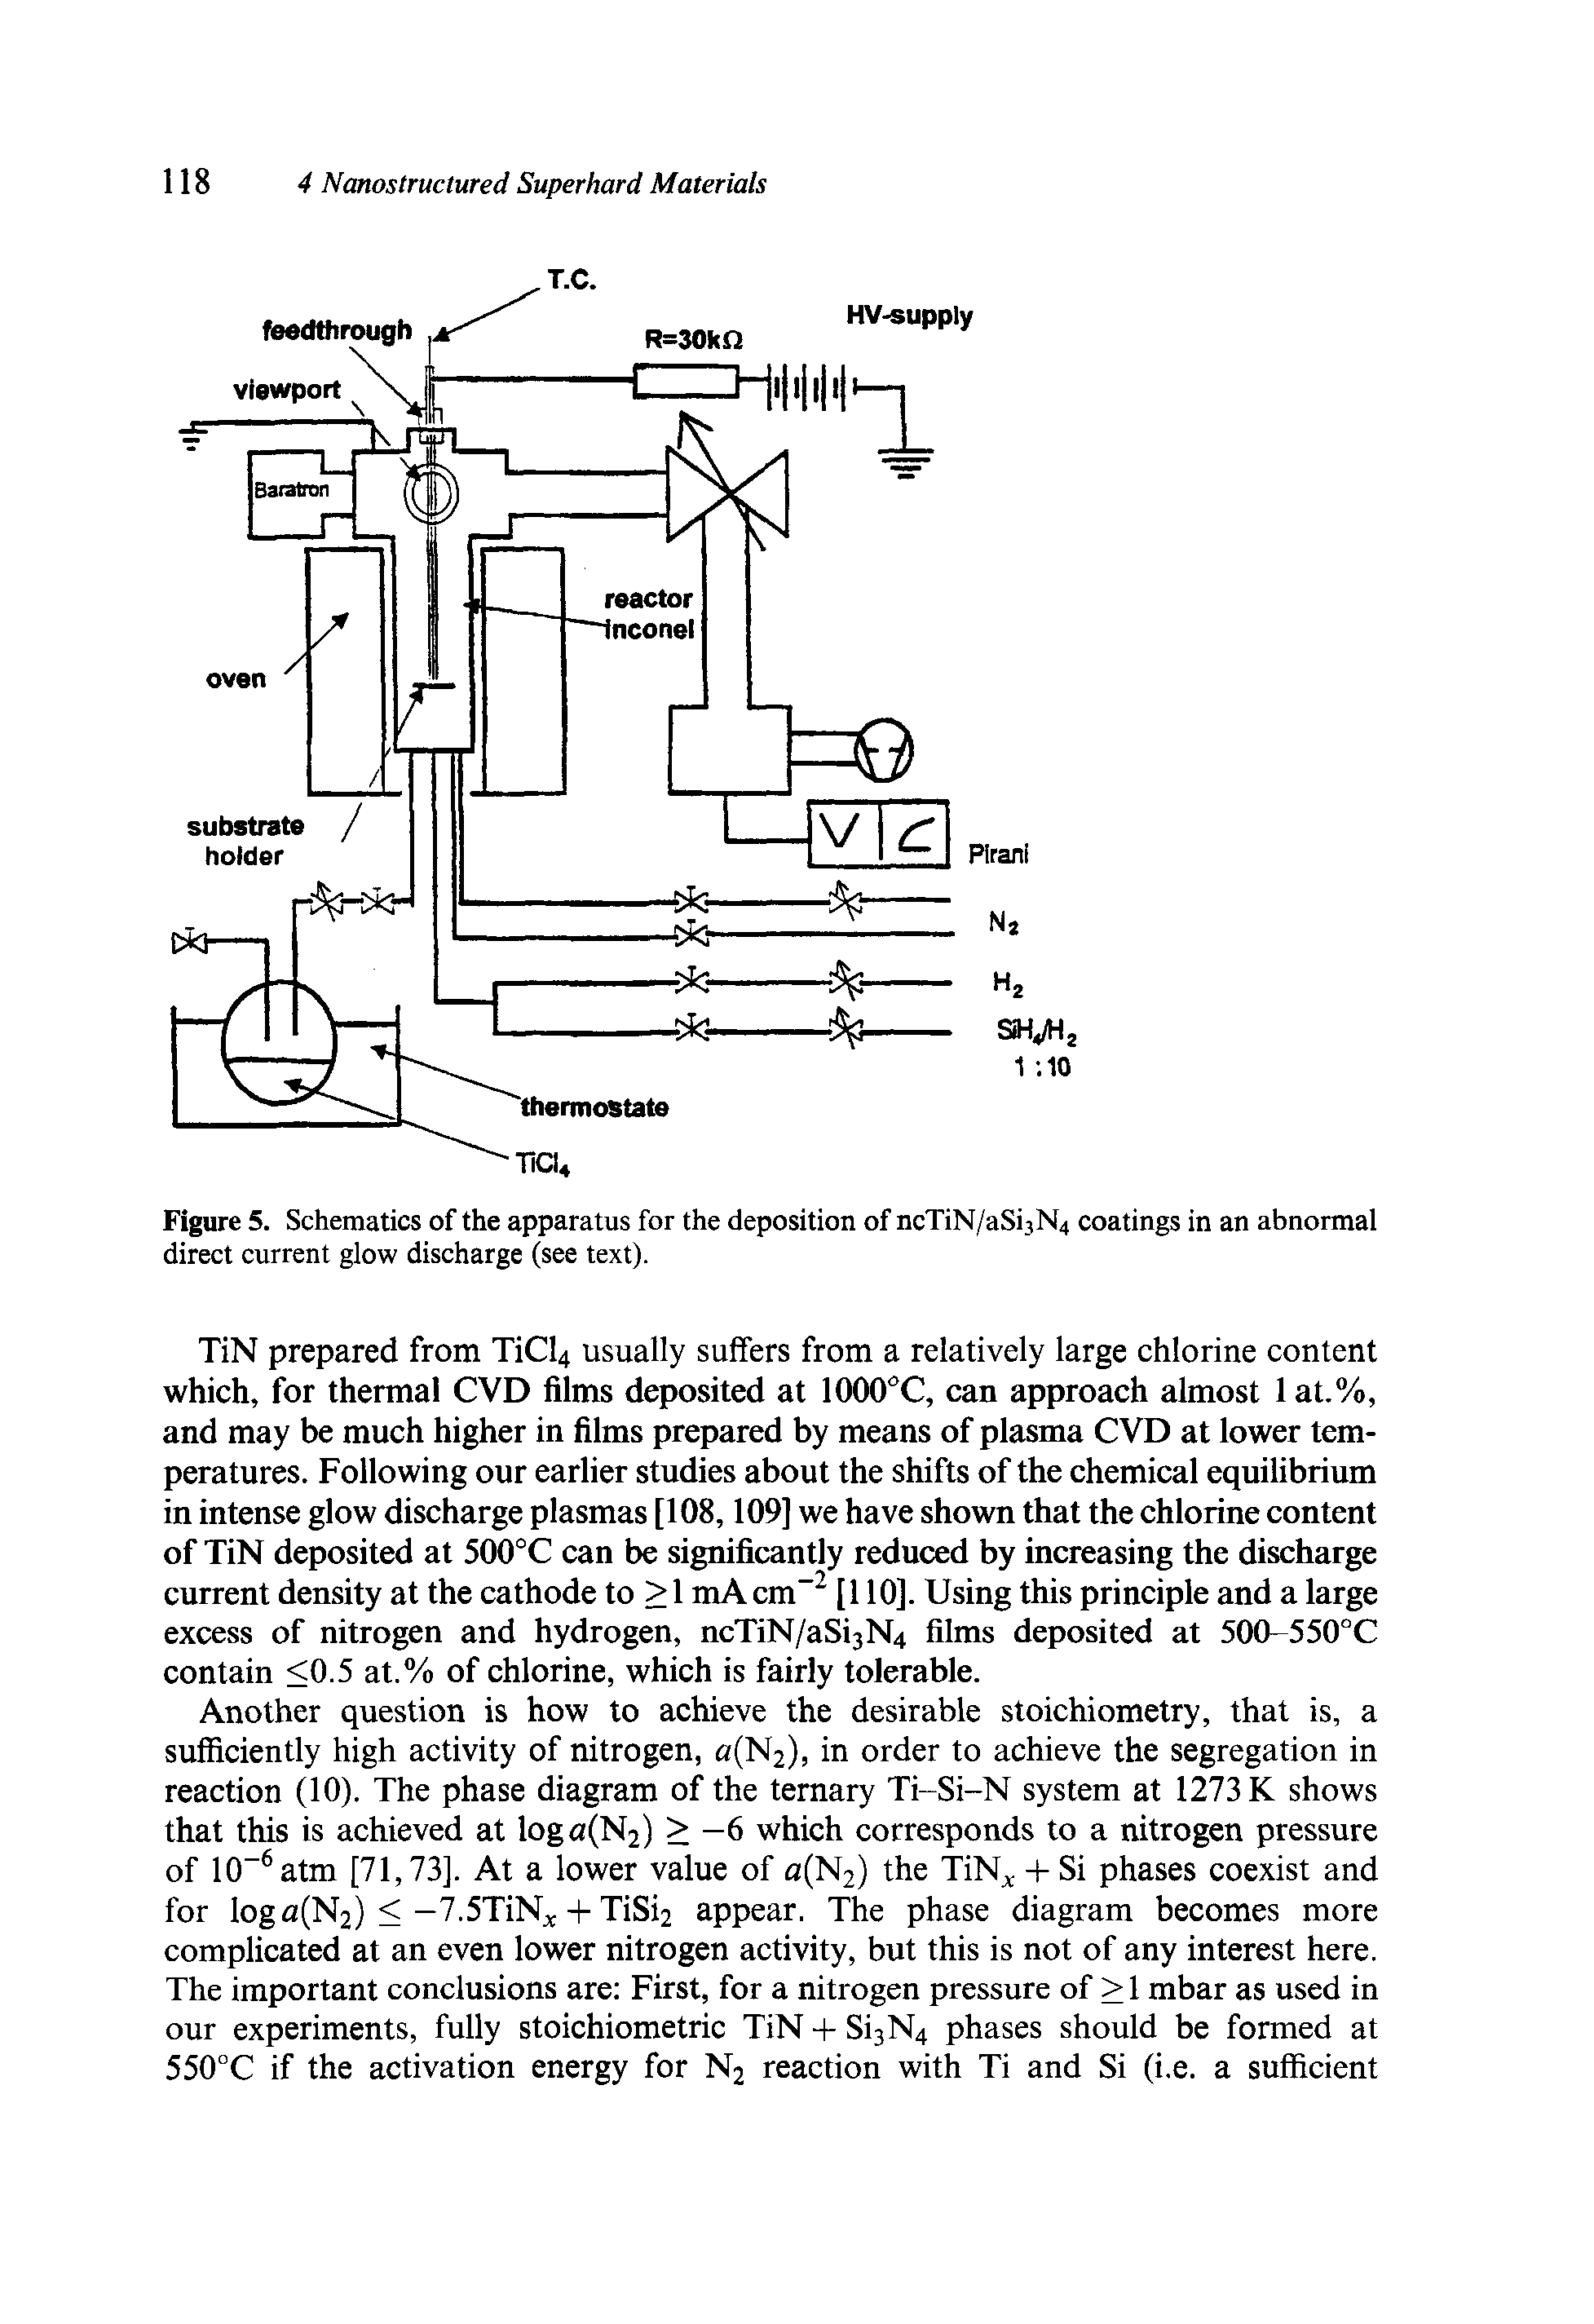 Figure 5. Schematics of the apparatus for the deposition of ncTiN/aSi3N4 coatings in an abnormal direct current glow discharge (see text).